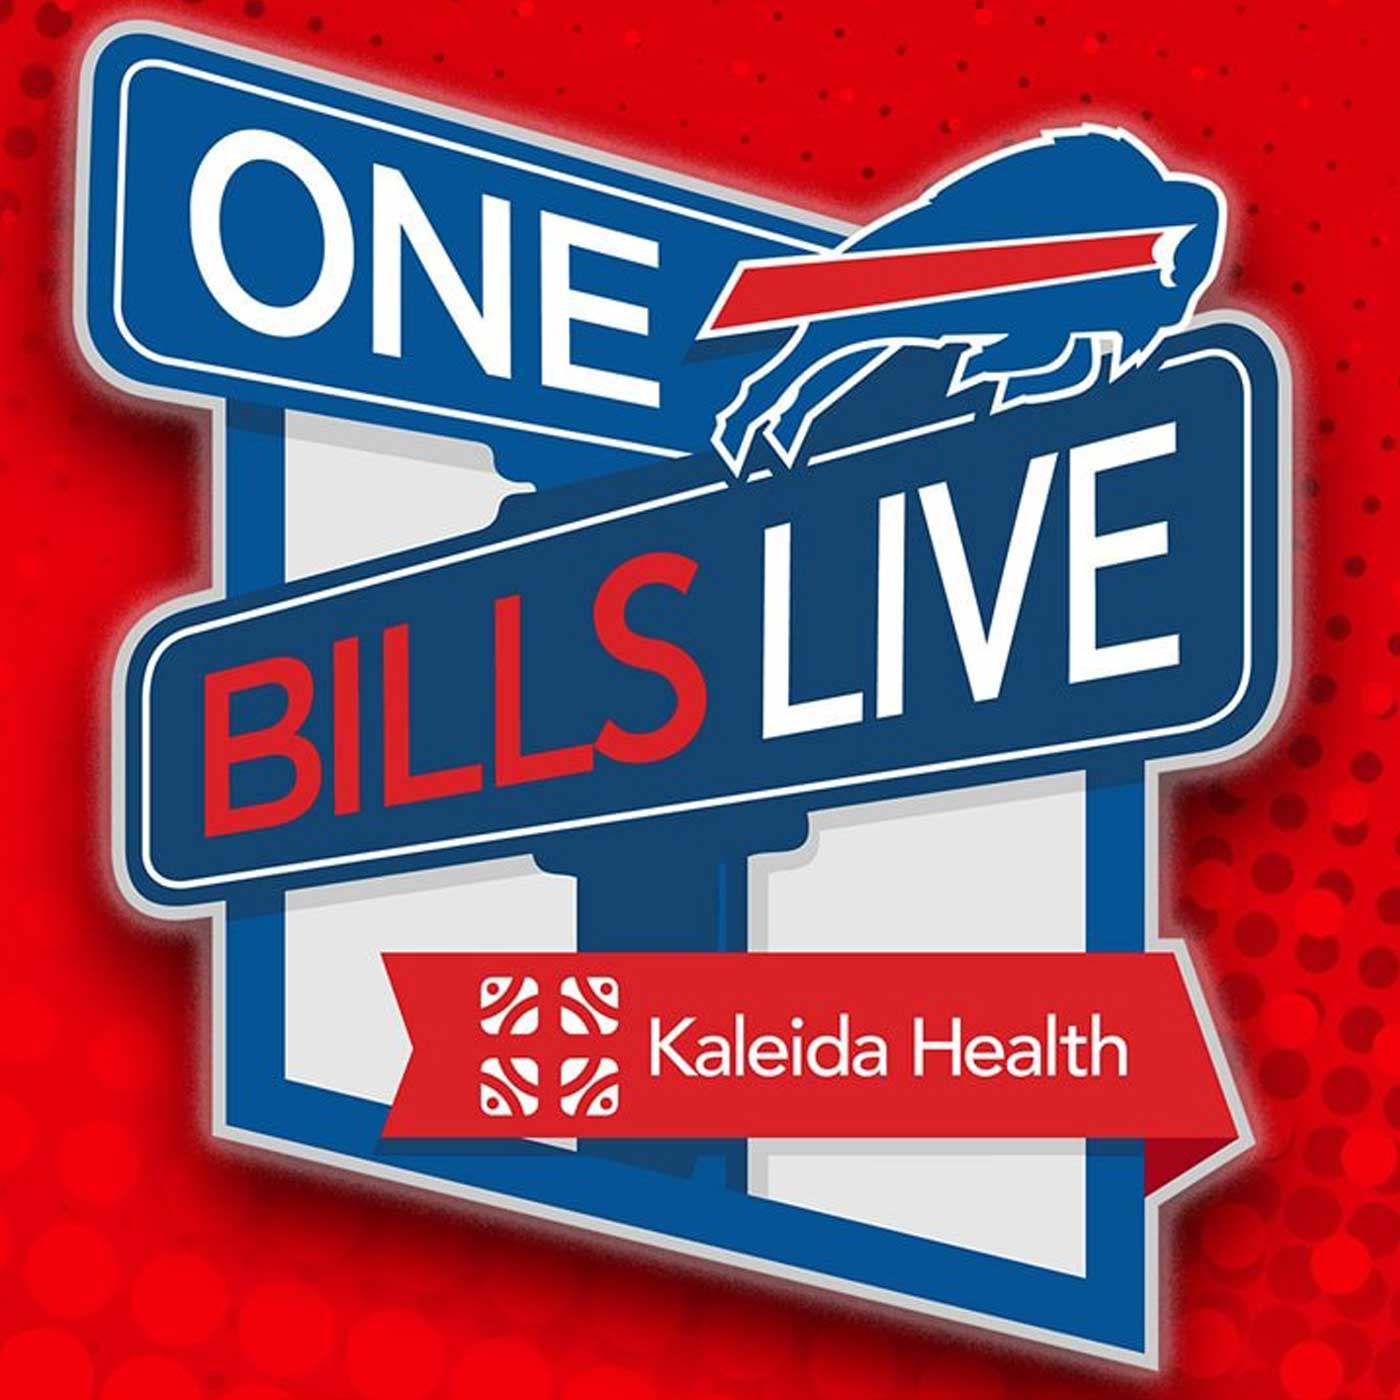 OBL 4/22: 2019 NFL Draft preview with Sam Monson; Levi Wallace on returning for the 2019 season; Eric Moulds looks back at being drafted in 1st round in 1996